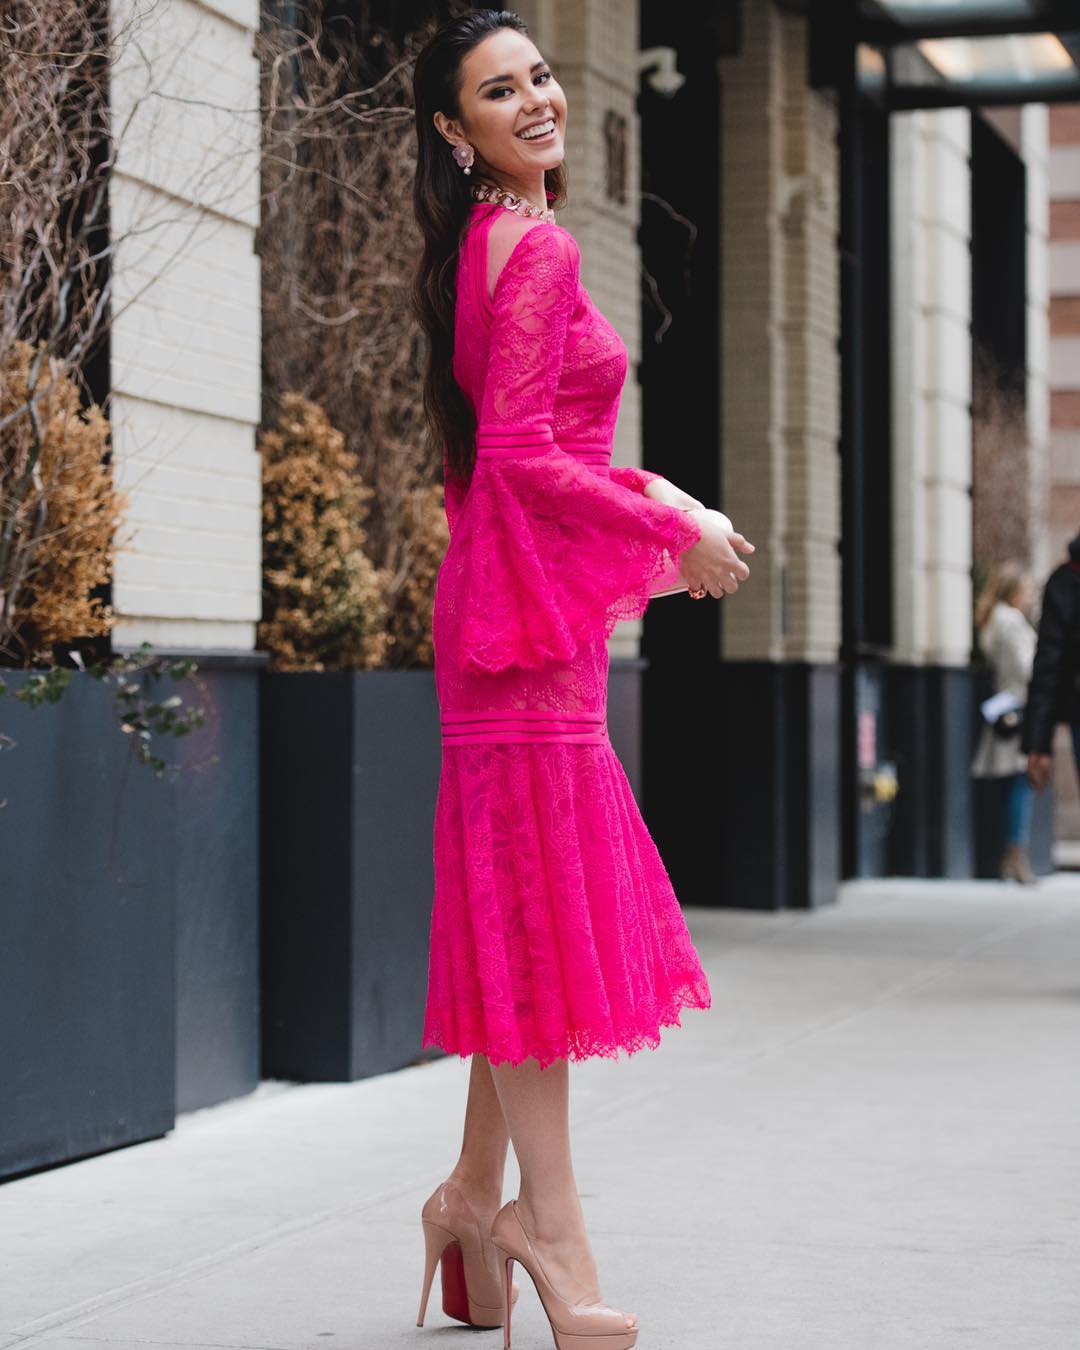 LOOK: Catriona Gray pretty in pink on first day of NY Fashion Week